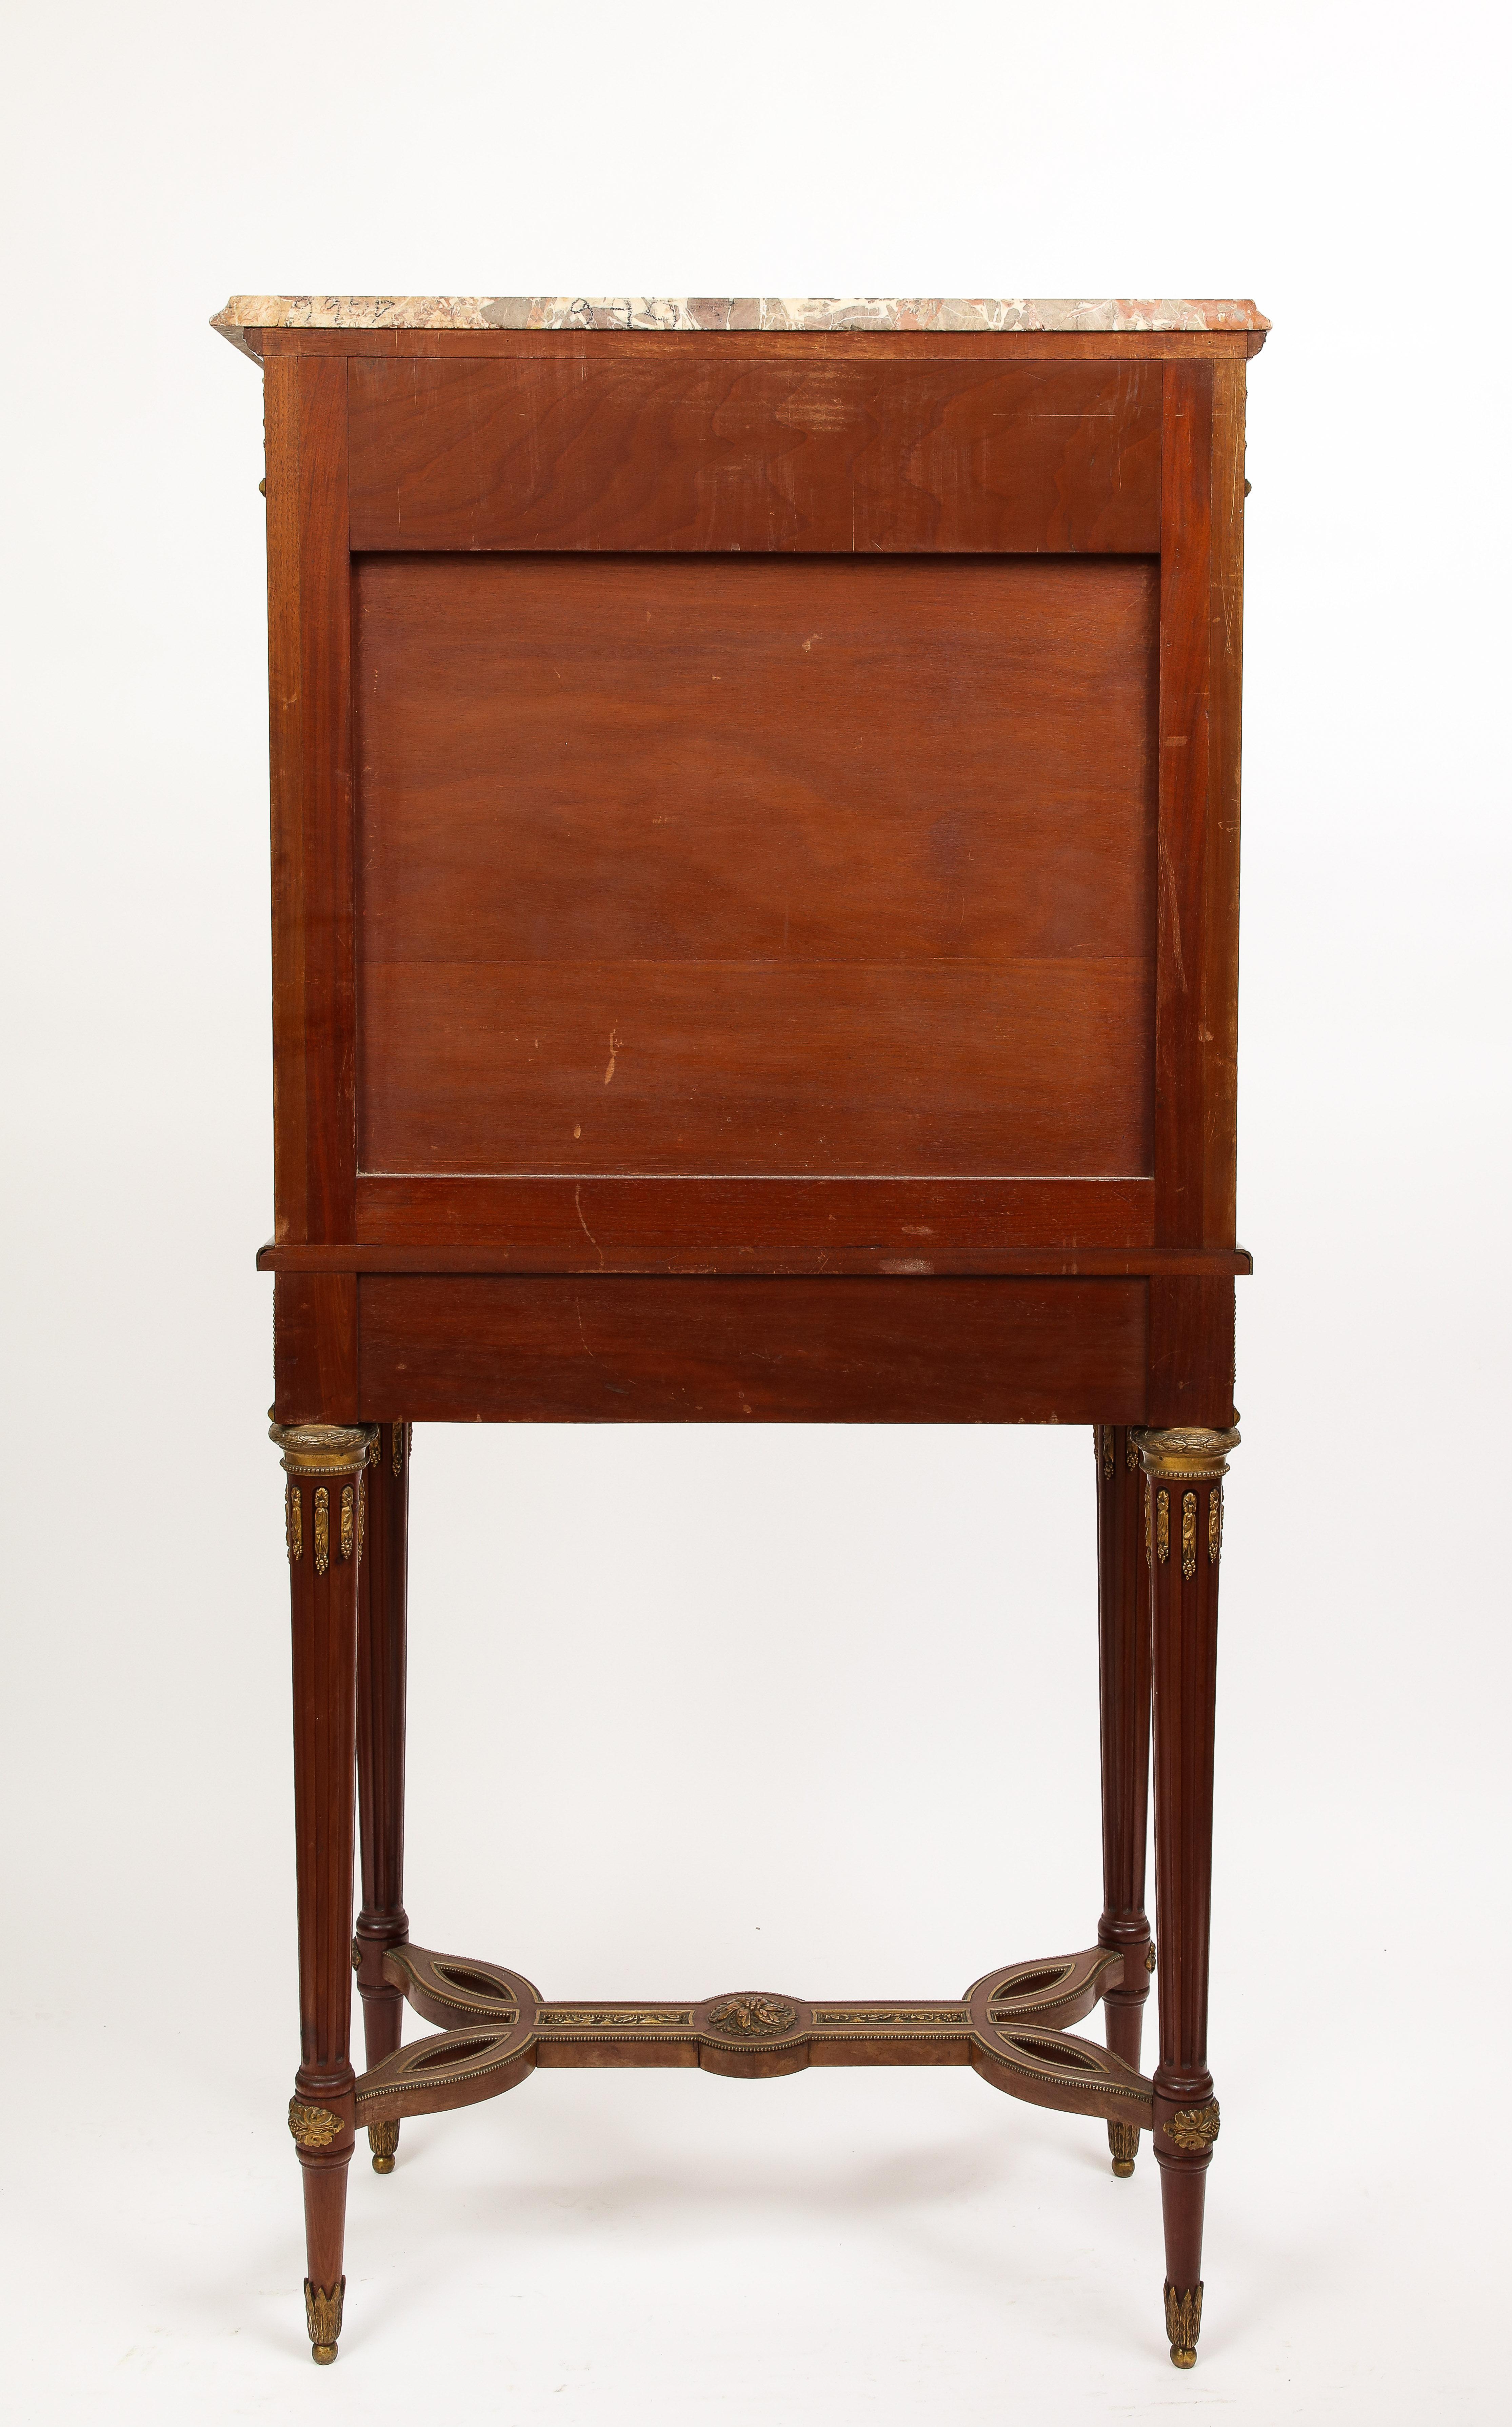 19th Century Dore Bronze and Sèvres Porcelain Mounted Parquetry Cabinet For Sale 7